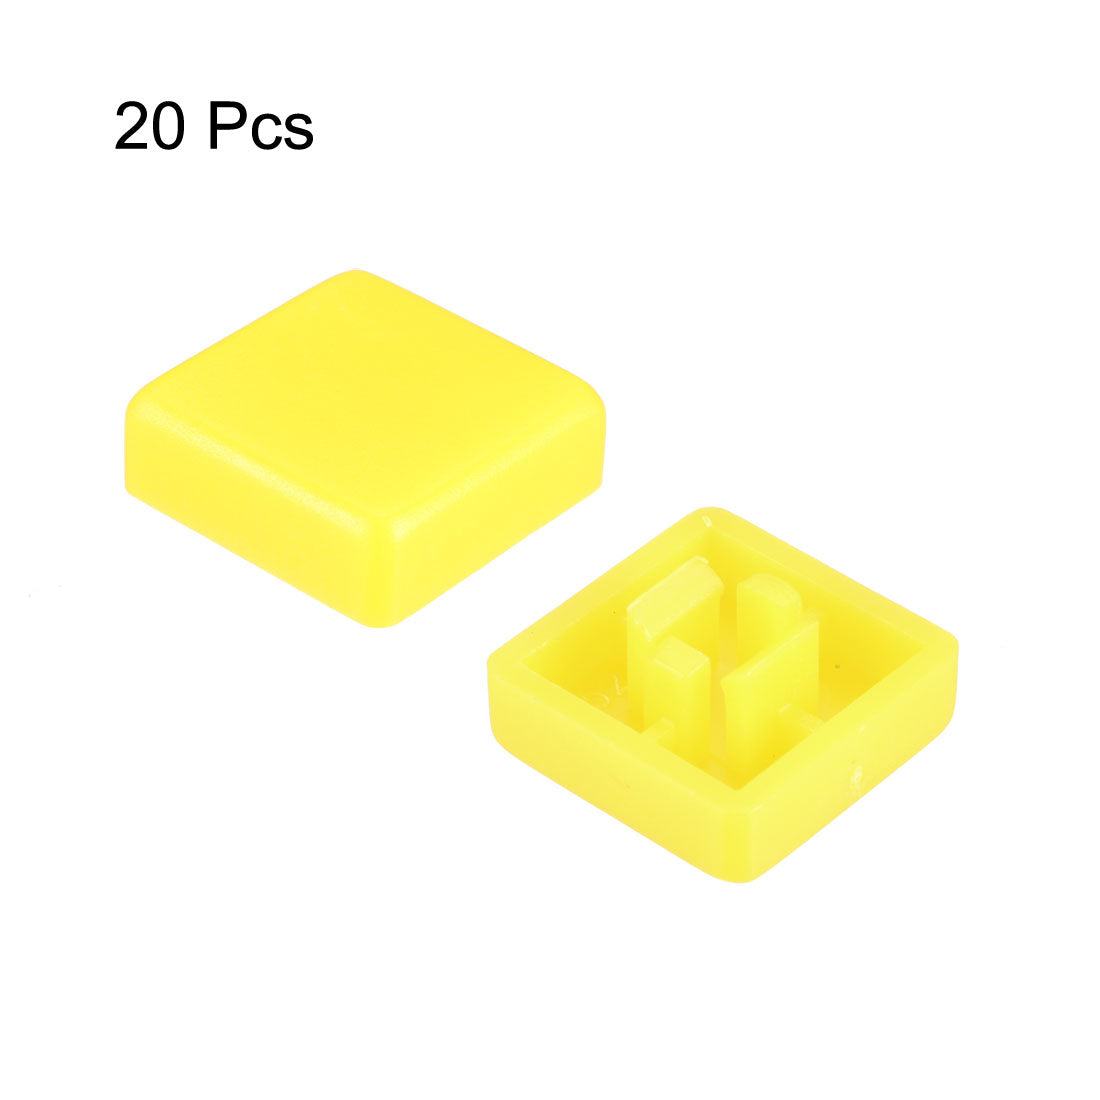 uxcell Uxcell 20Pcs Plastic 12x12mm Pushbutton Tactile Switch Caps Cover Keycaps Yellow for 12x12x7.3mm Tact Switch